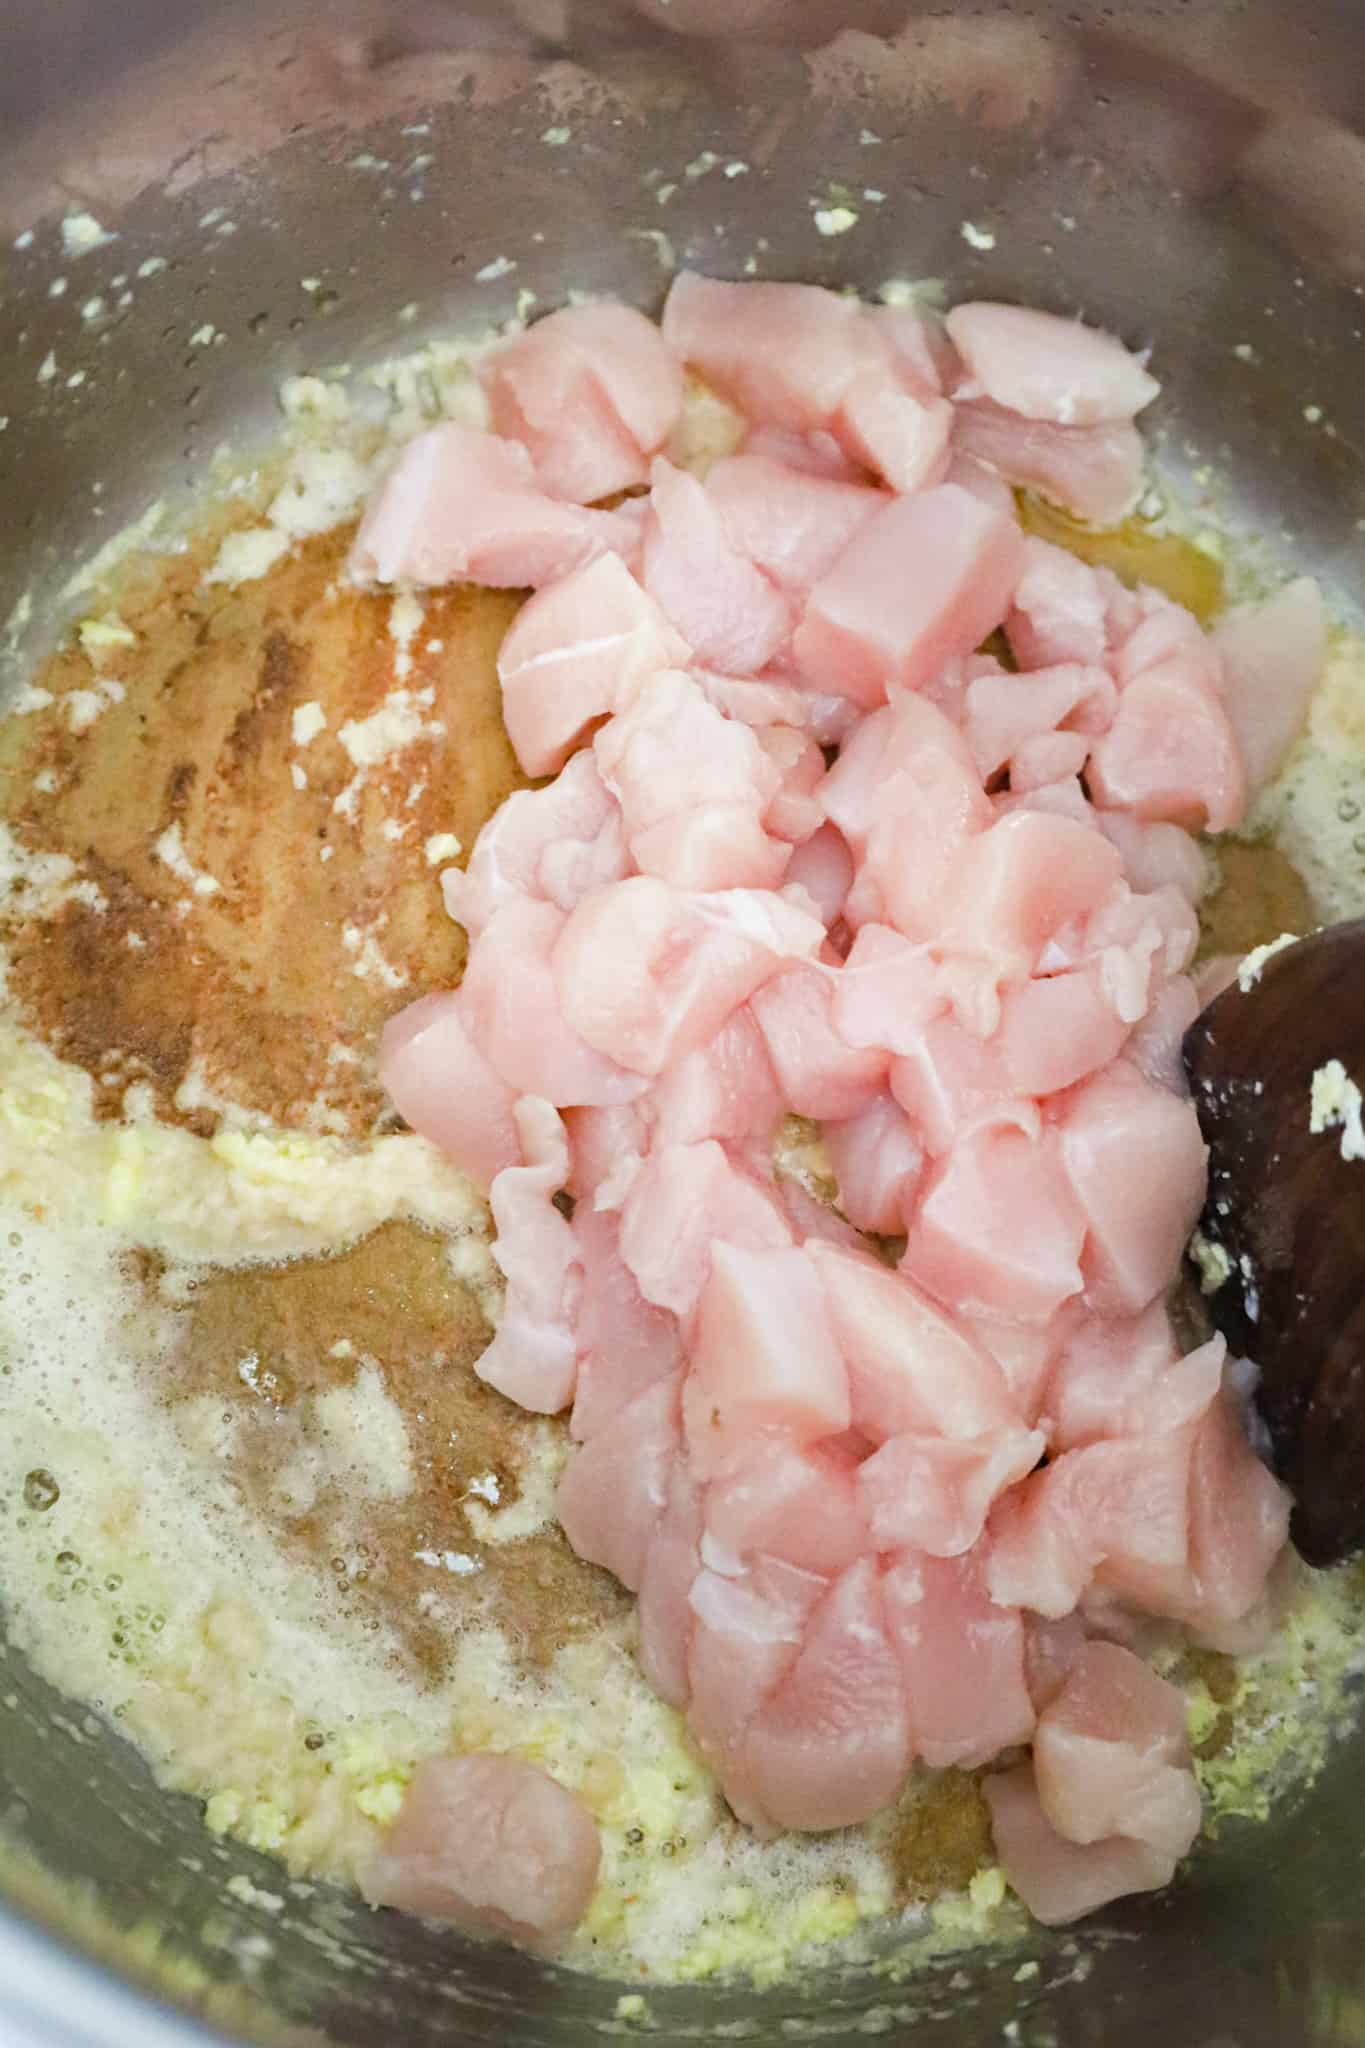 raw diced chicken breast cooking in an Instant Pot